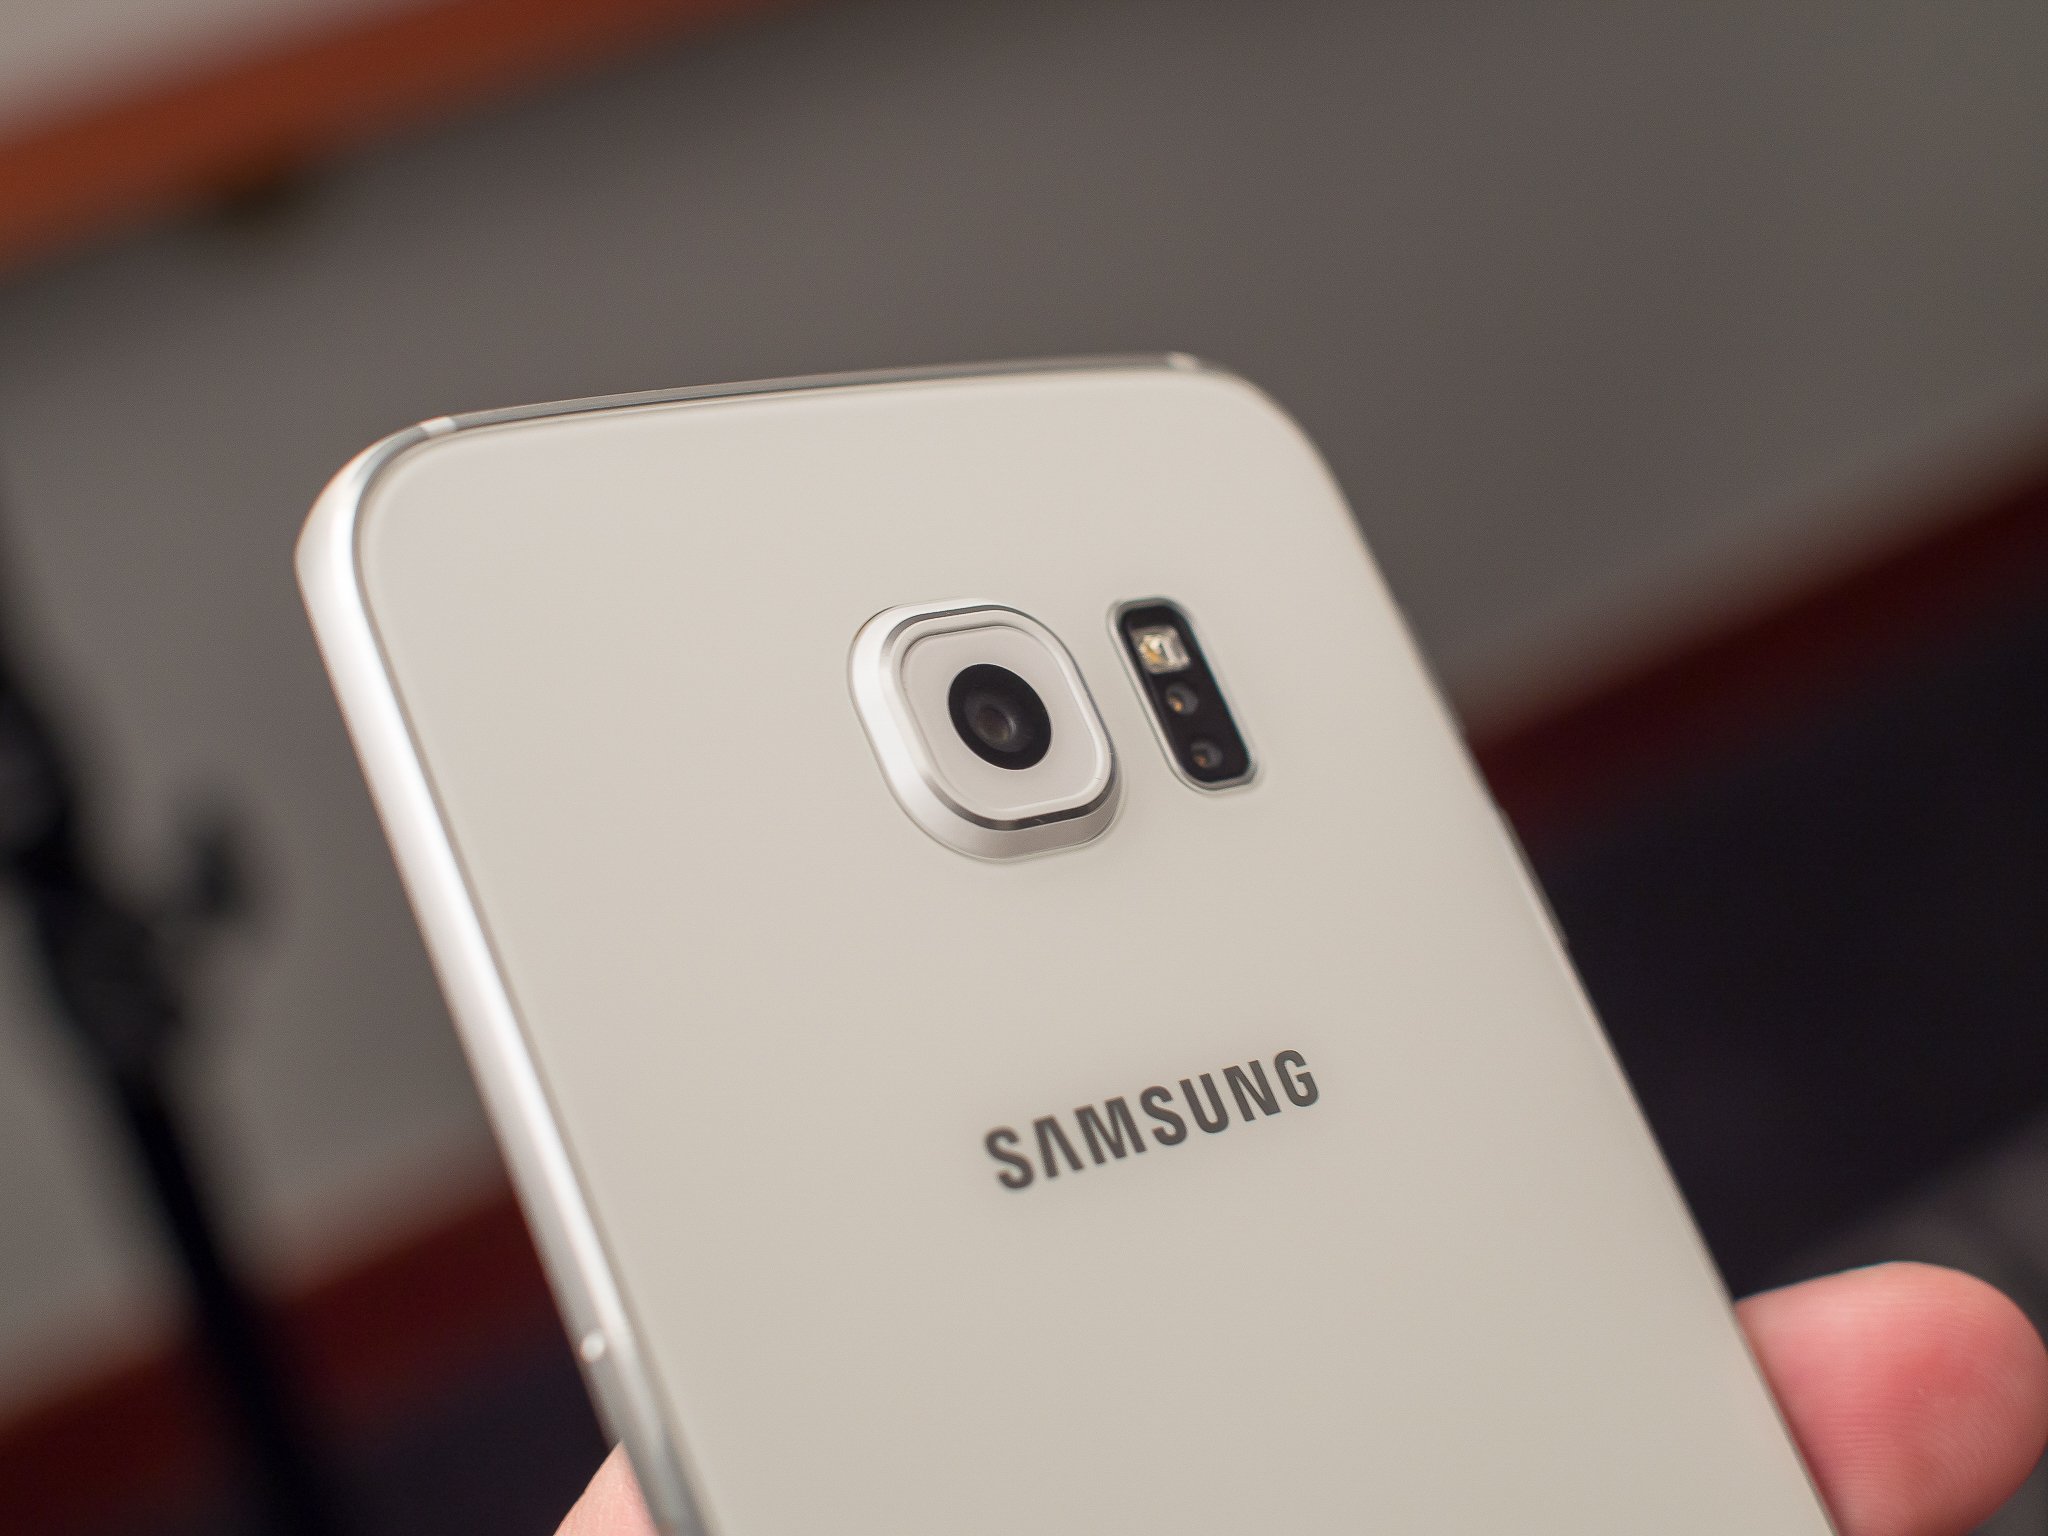 Samsung Galaxy S6 and S6 edge | Central